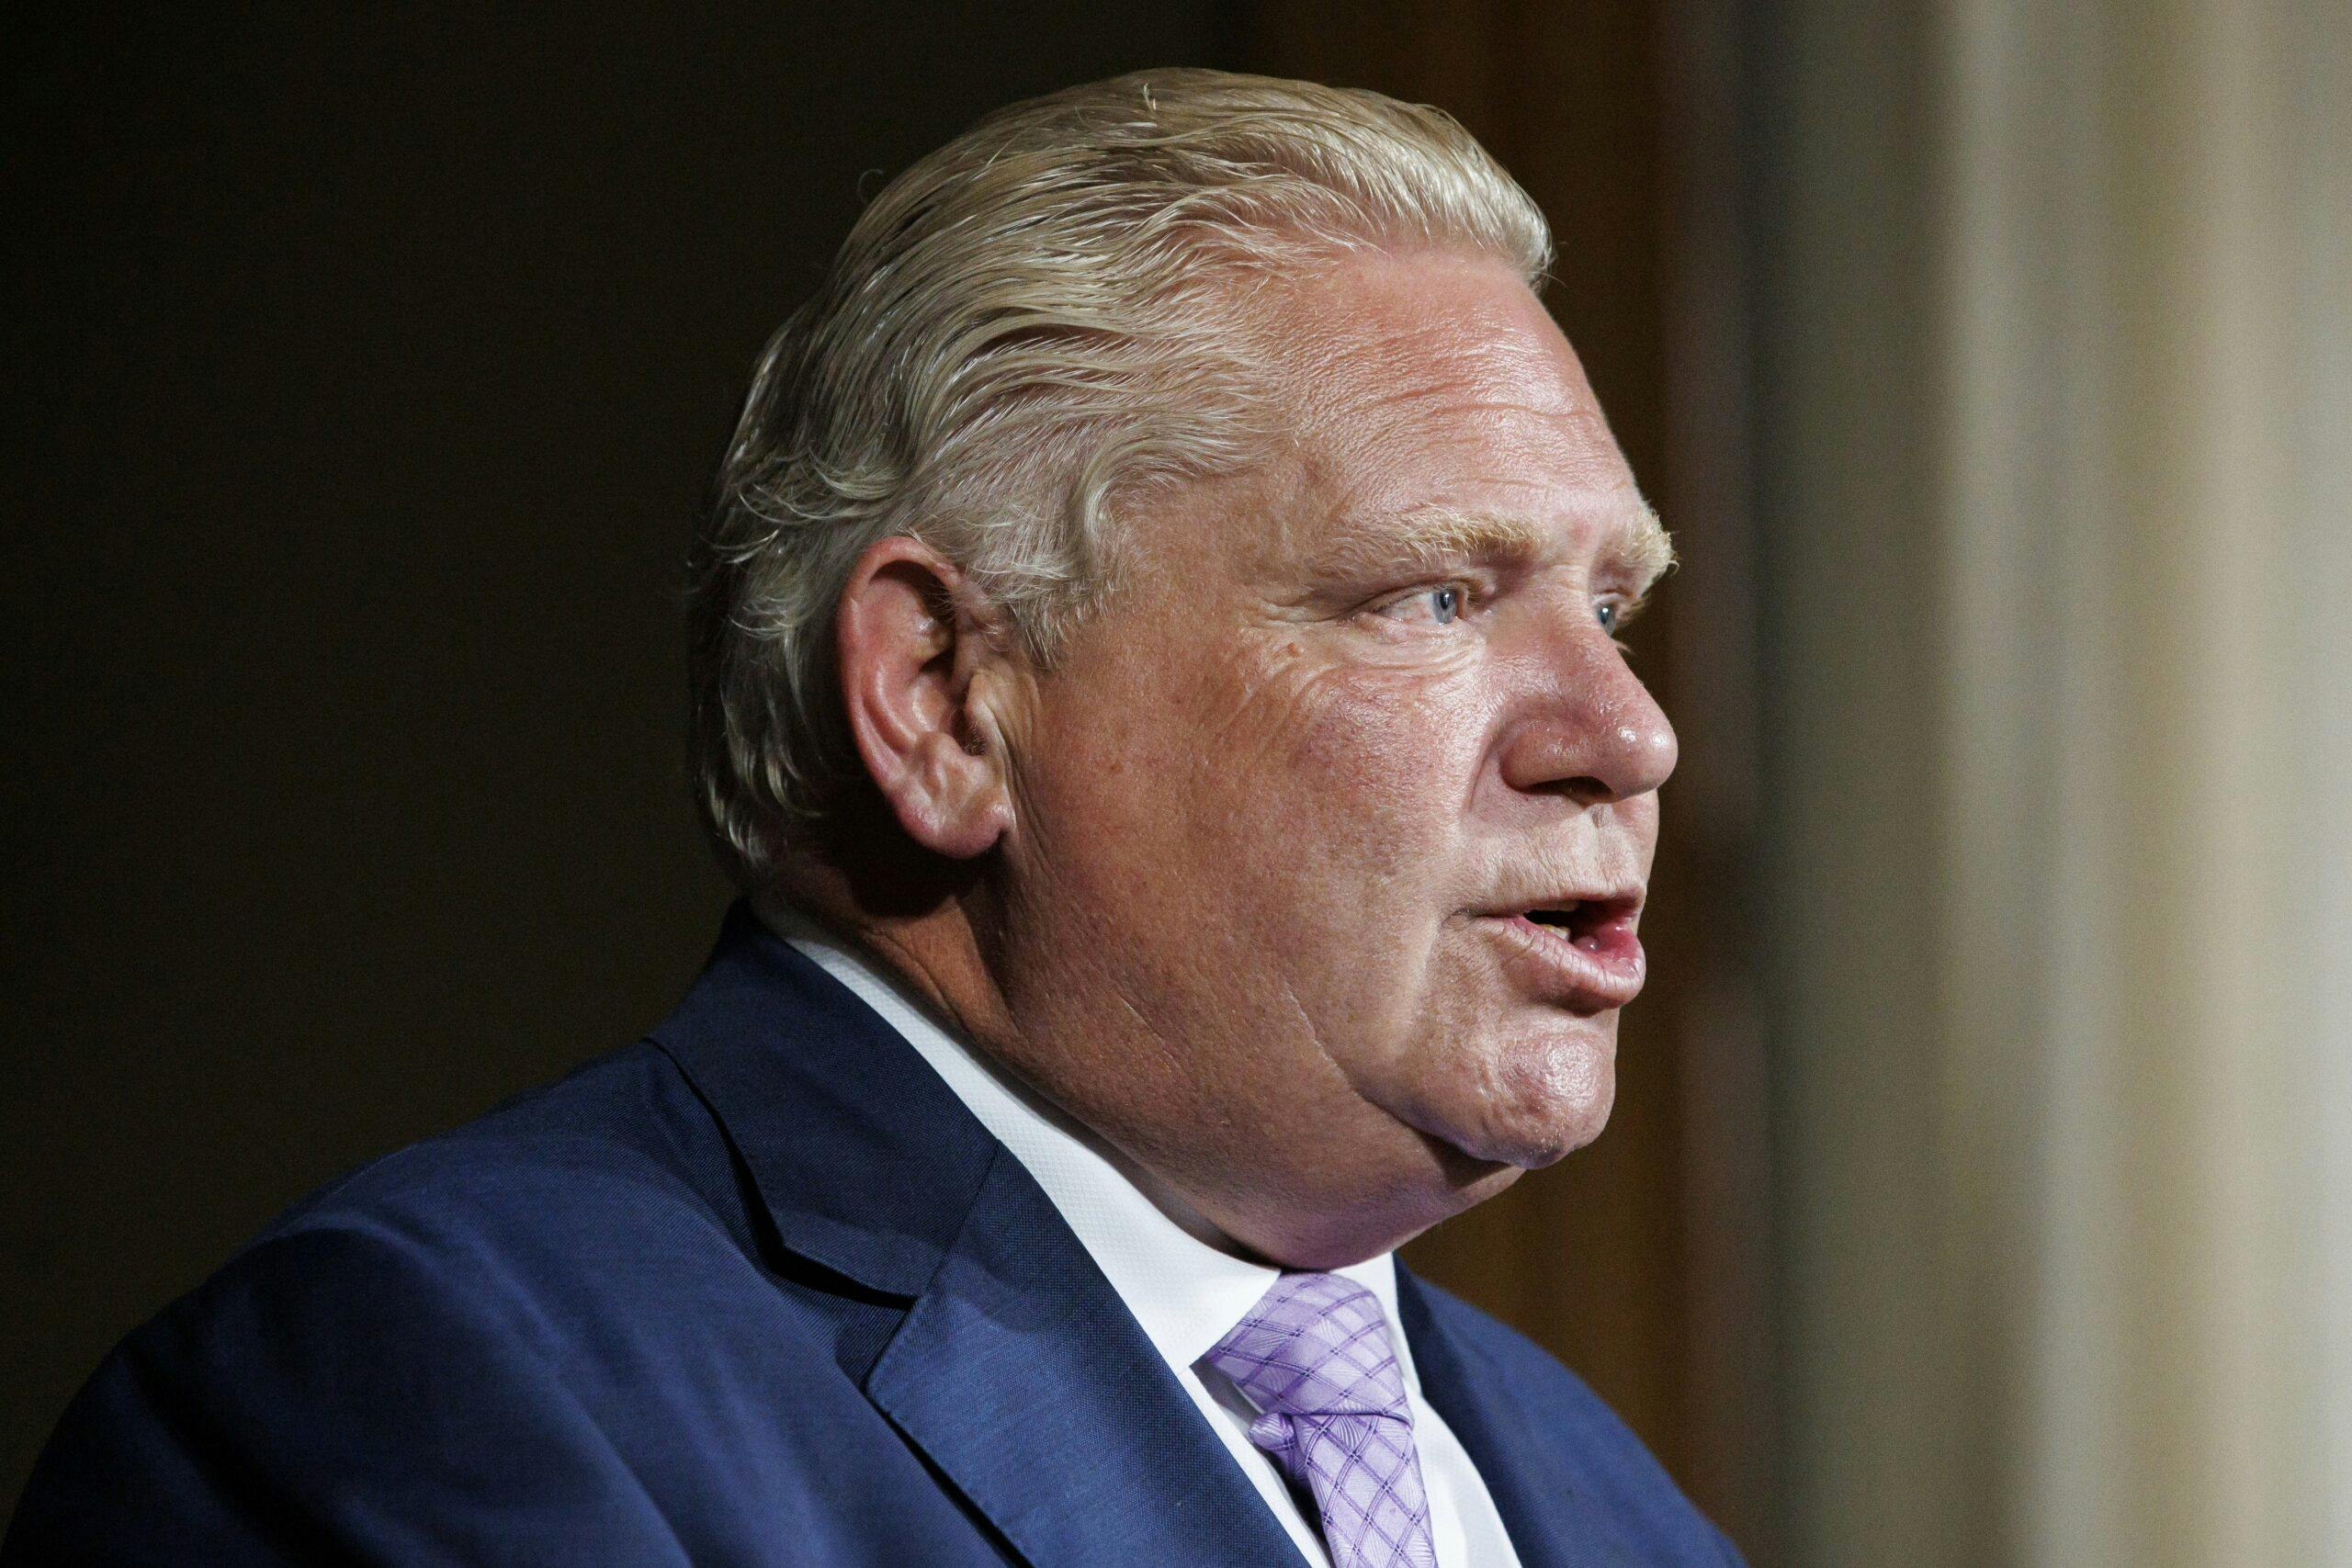 AMO 2022: Doug Ford says more homes will end the housing crisis ‘full stop.’ Experts say that’s not enough.